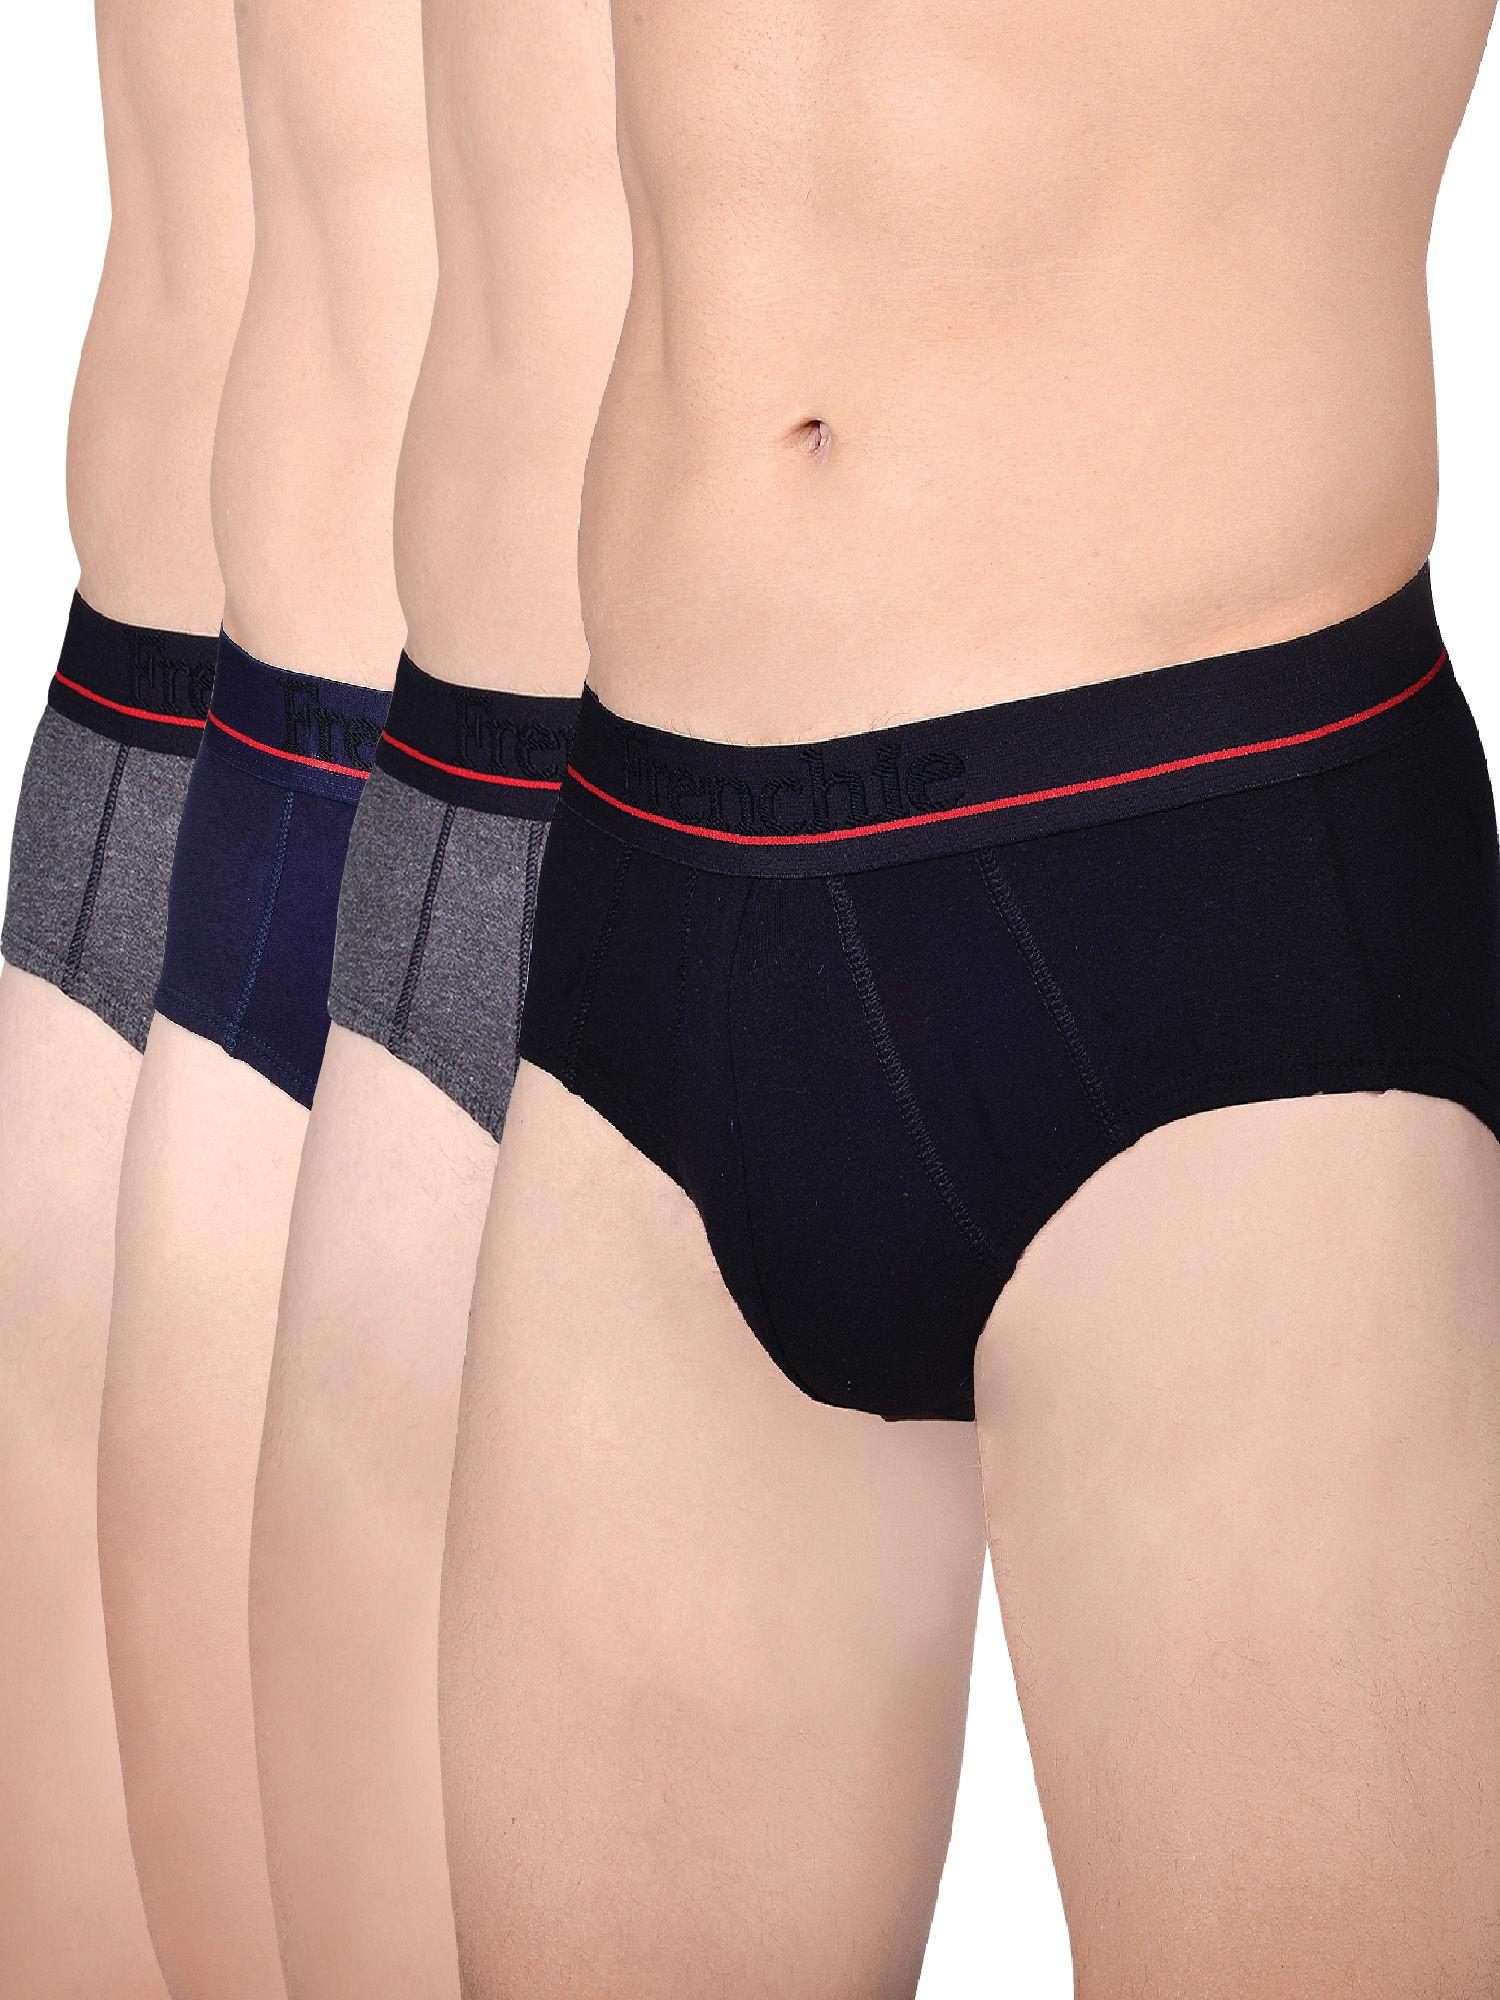 casuals 4003 mens cotton briefs assorted colours (pack of 4)